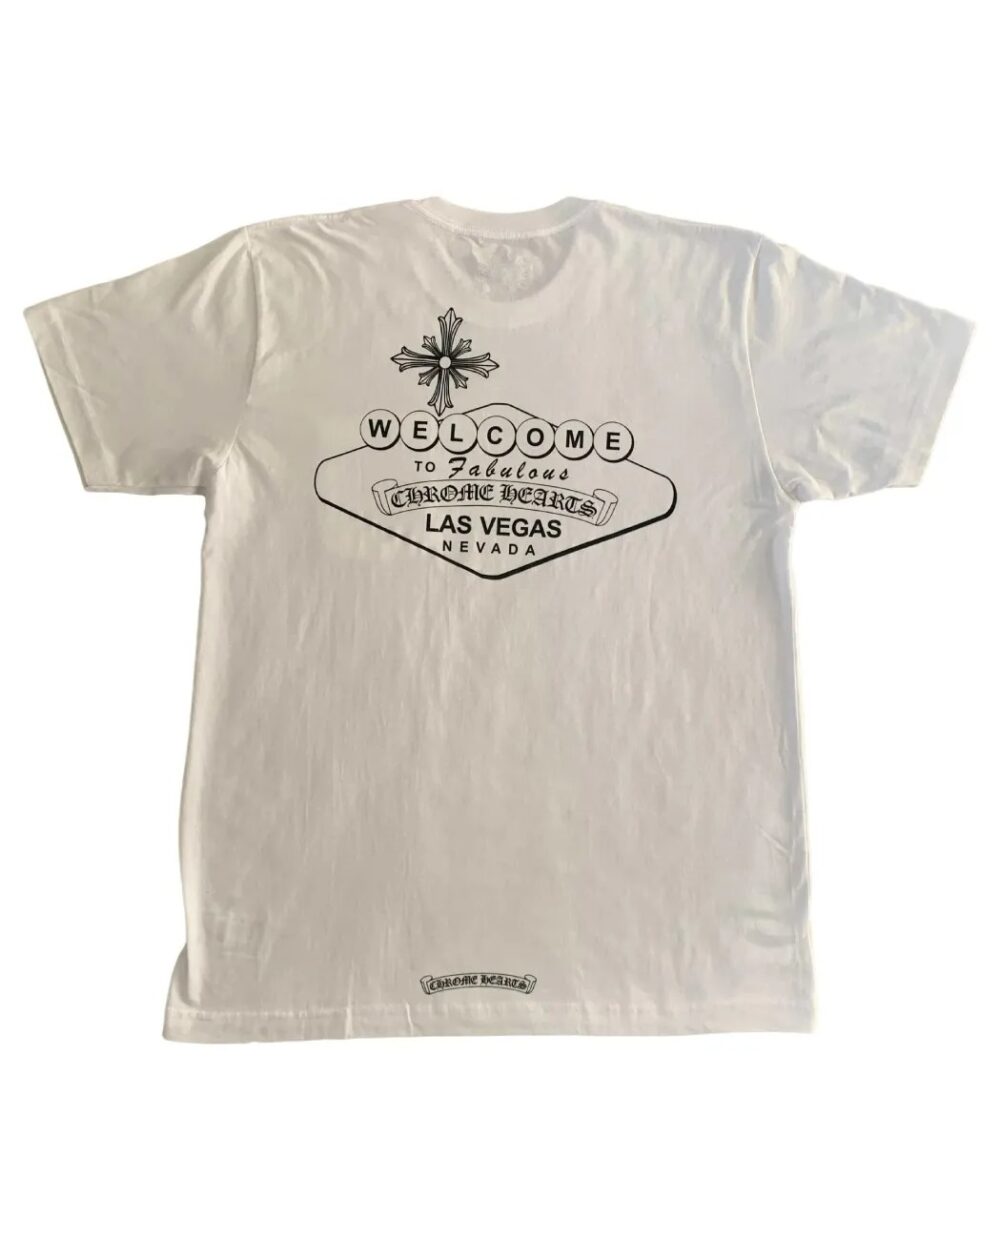 "White Chrome Hearts Las Vegas Exclusive T-Shirt with iconic logo."